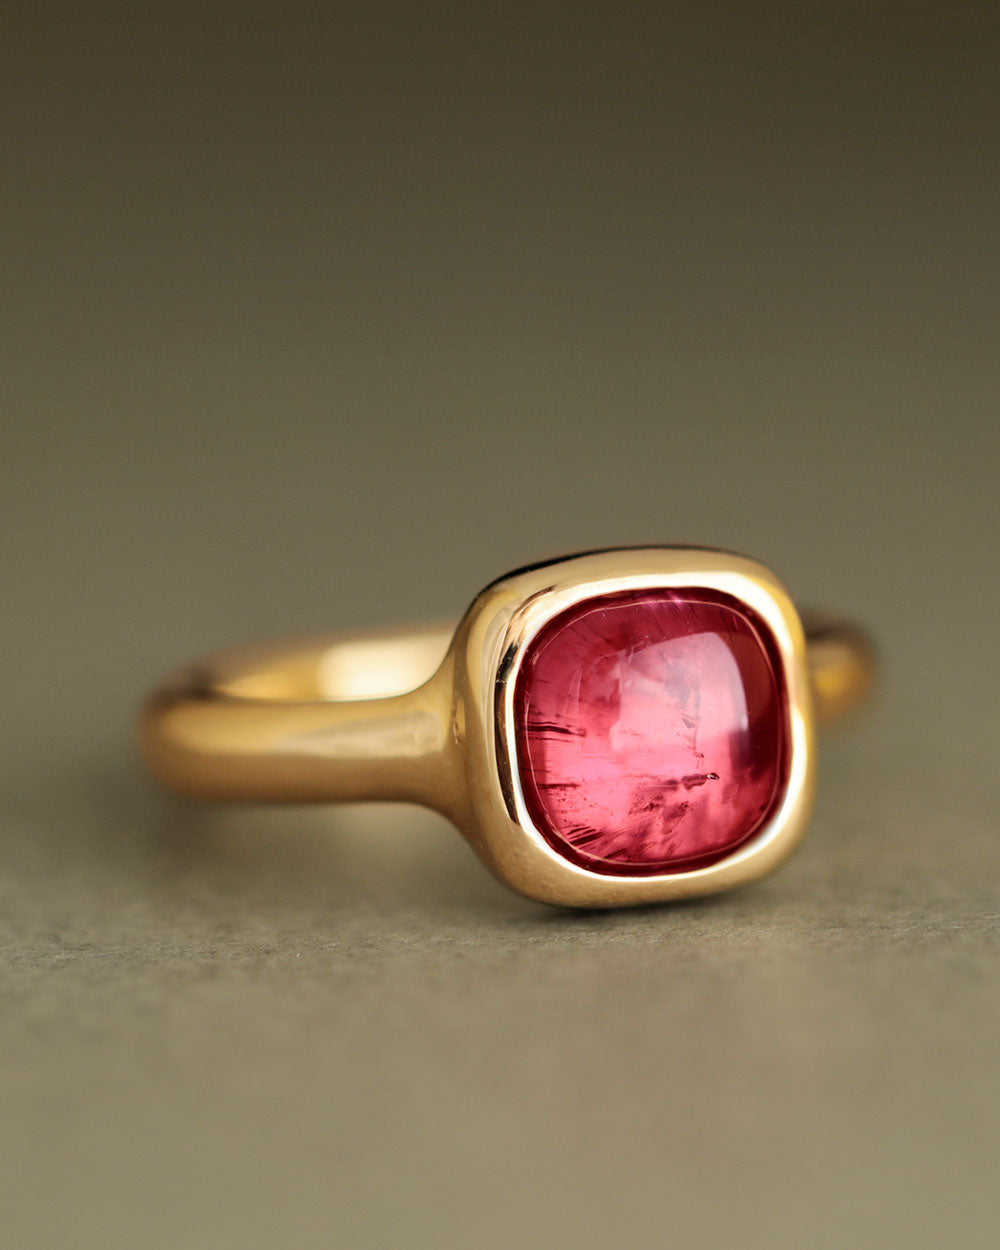 Sophia Pink Tourmaline Solitaire Ring set in Solid 18k Gold by George Rings hot pink square cabochon